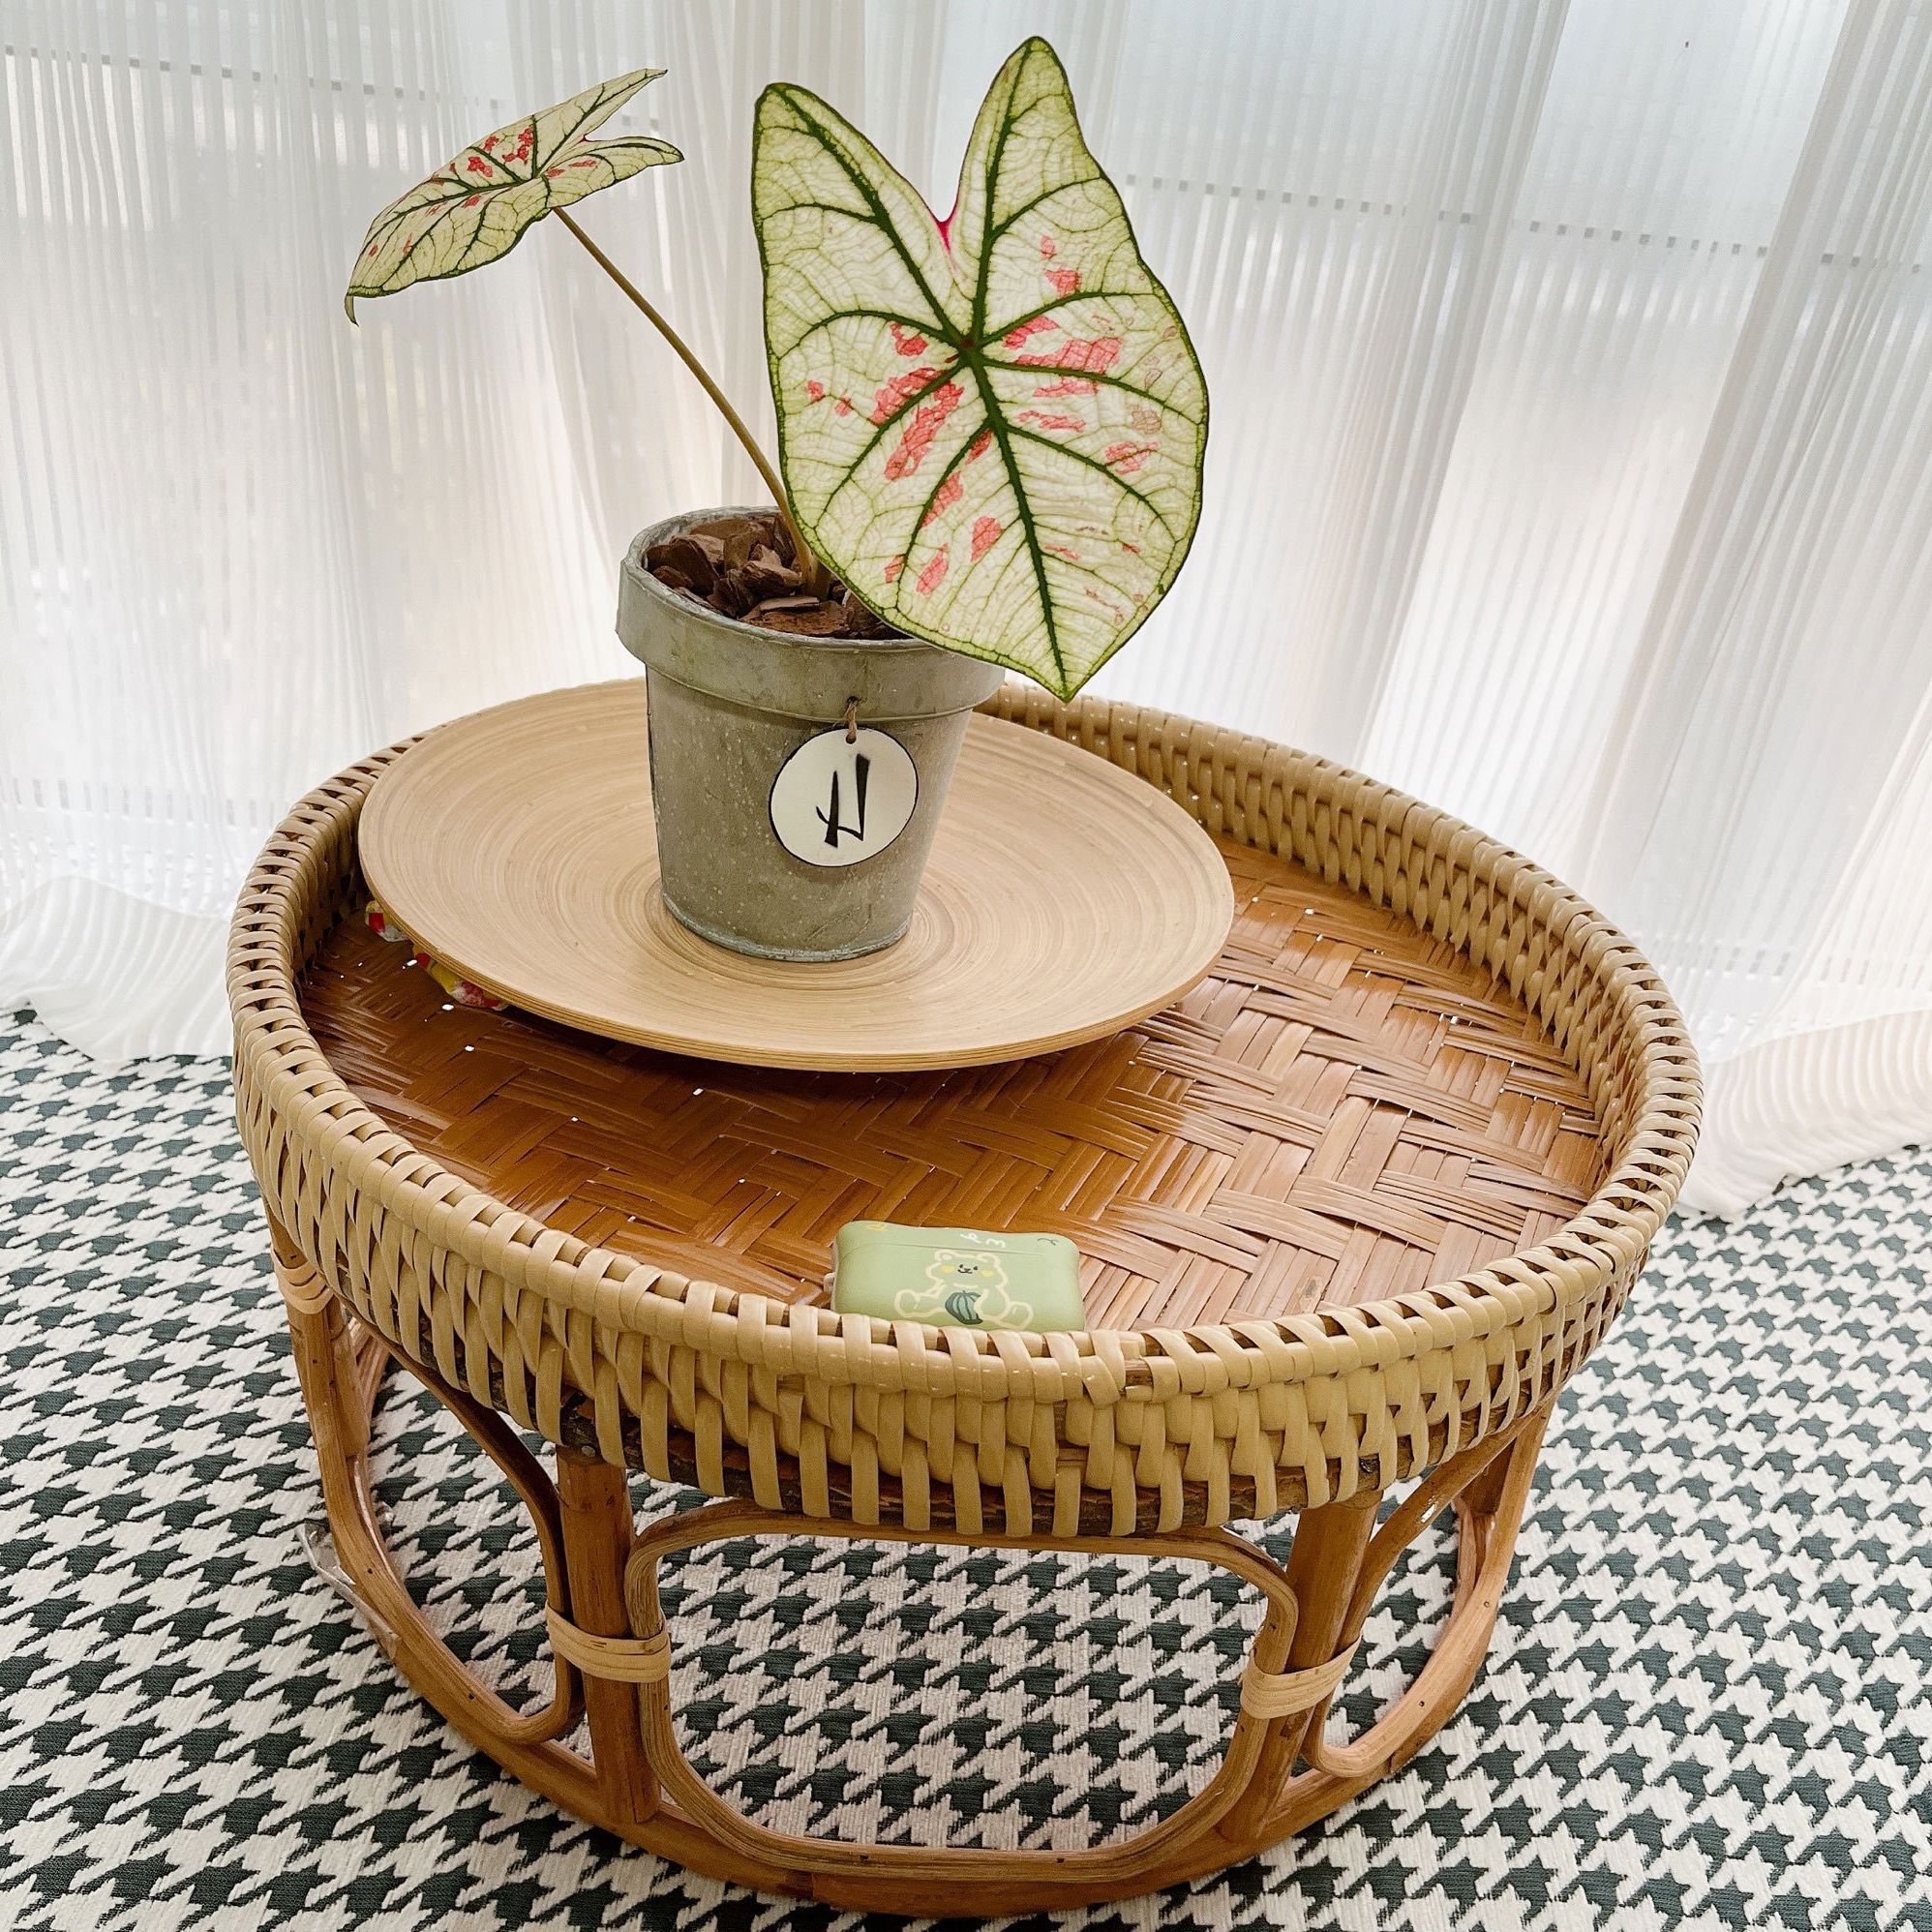 Most Popular Rattan Coffee Tables Throughout Natural Handmade Round Rattan Coffee Table, Coffee Rattan Table, Bohemian  Oval Wicker Side Table,rattan End Table – Etsy (View 6 of 10)